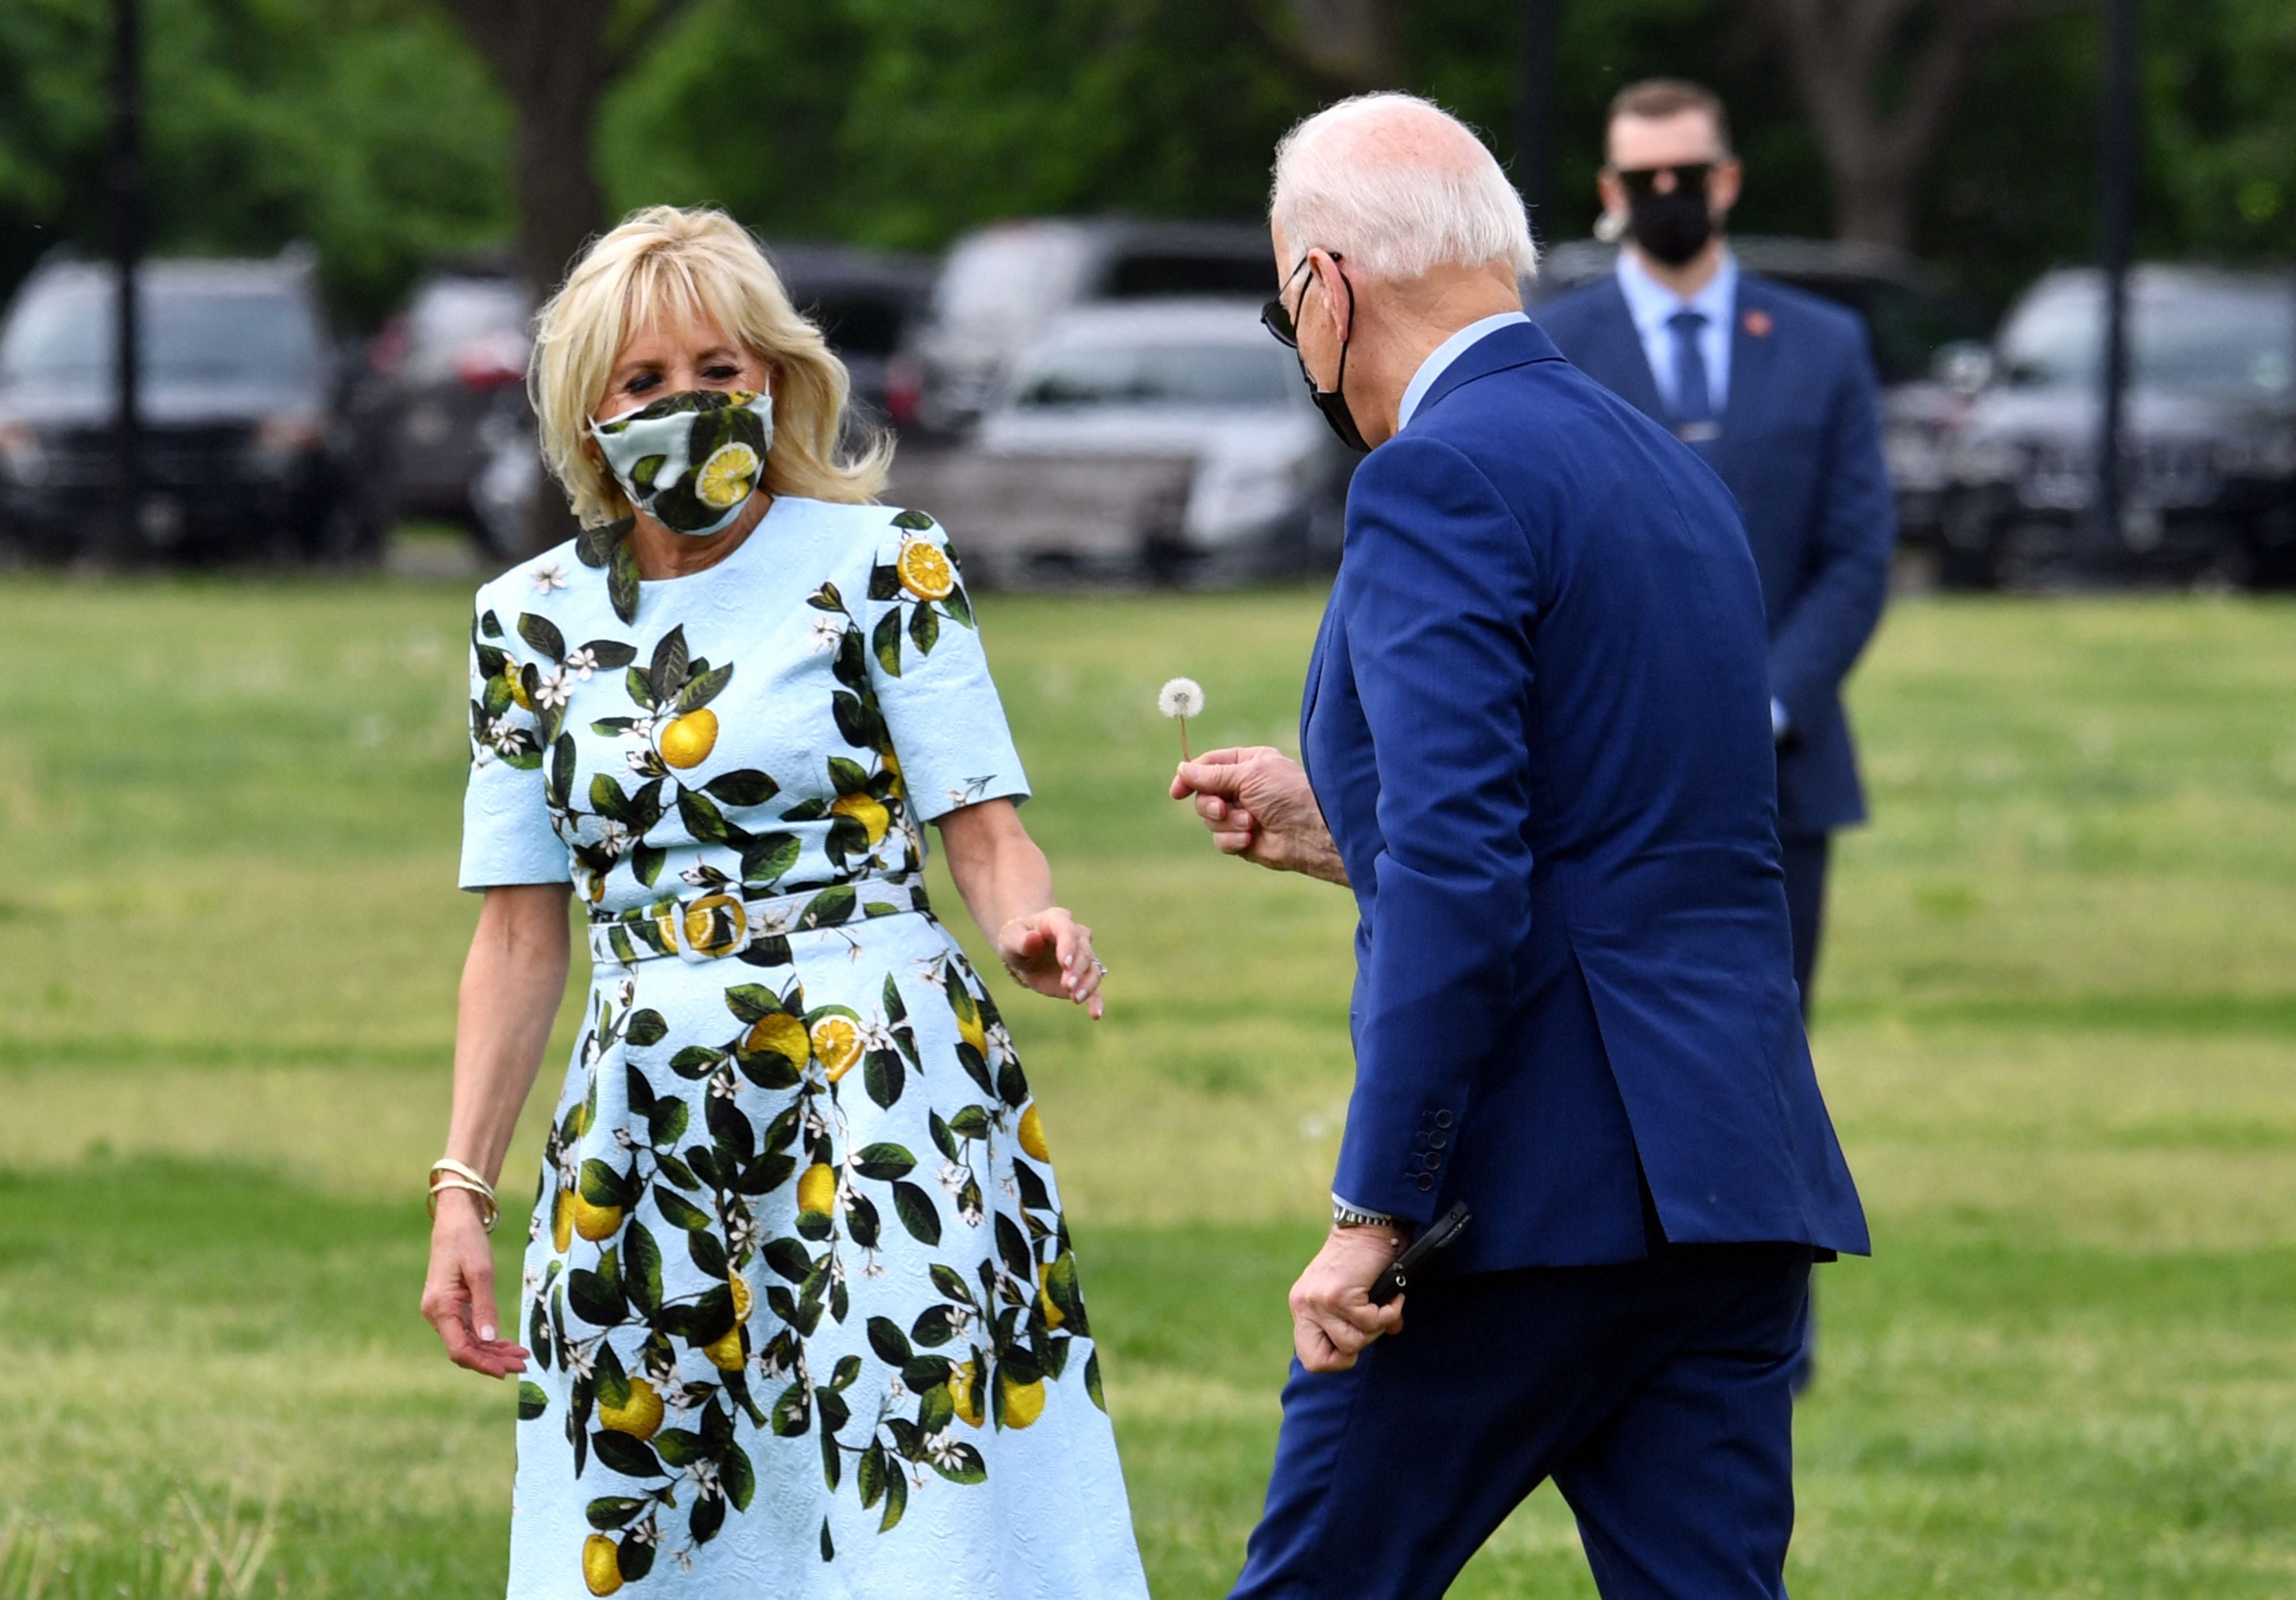 US President Joe Biden gives a dandelion flower to First Lady Jill Biden as they arrive to depart on Marine One from the Ellipse in Washington, DC, on 29 April 2021